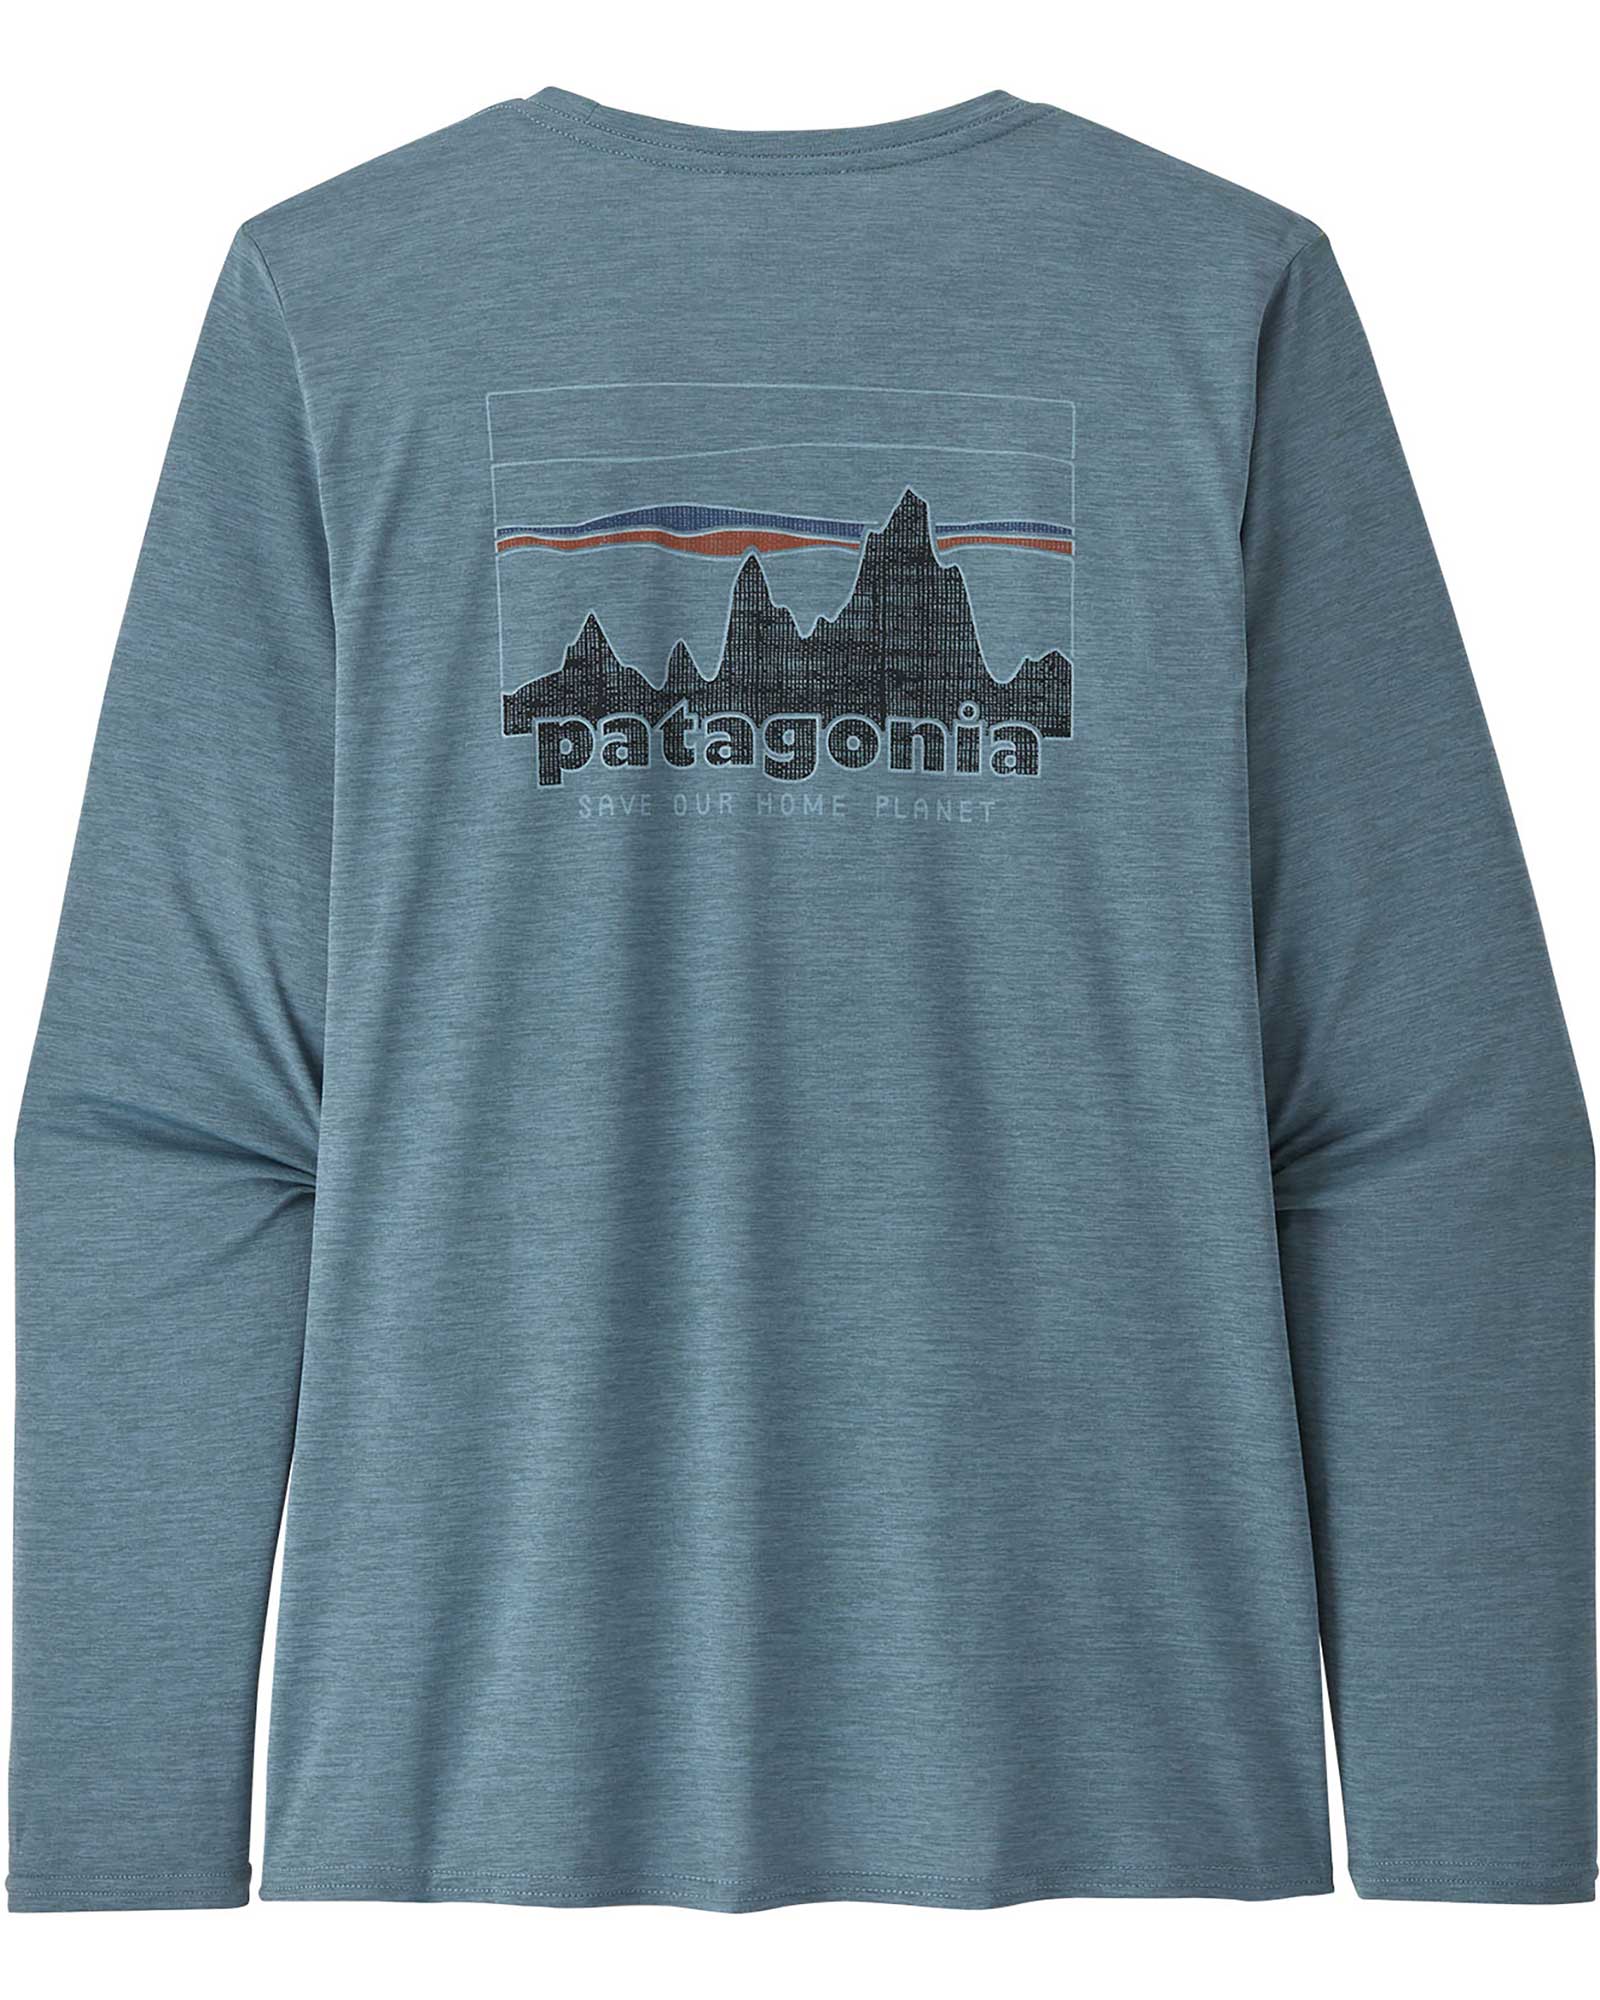 Patagonia Long Sleeve Capilene Cool Daily Graphic Women’s T Shirt - 73 Skyline/Plume Grey XL